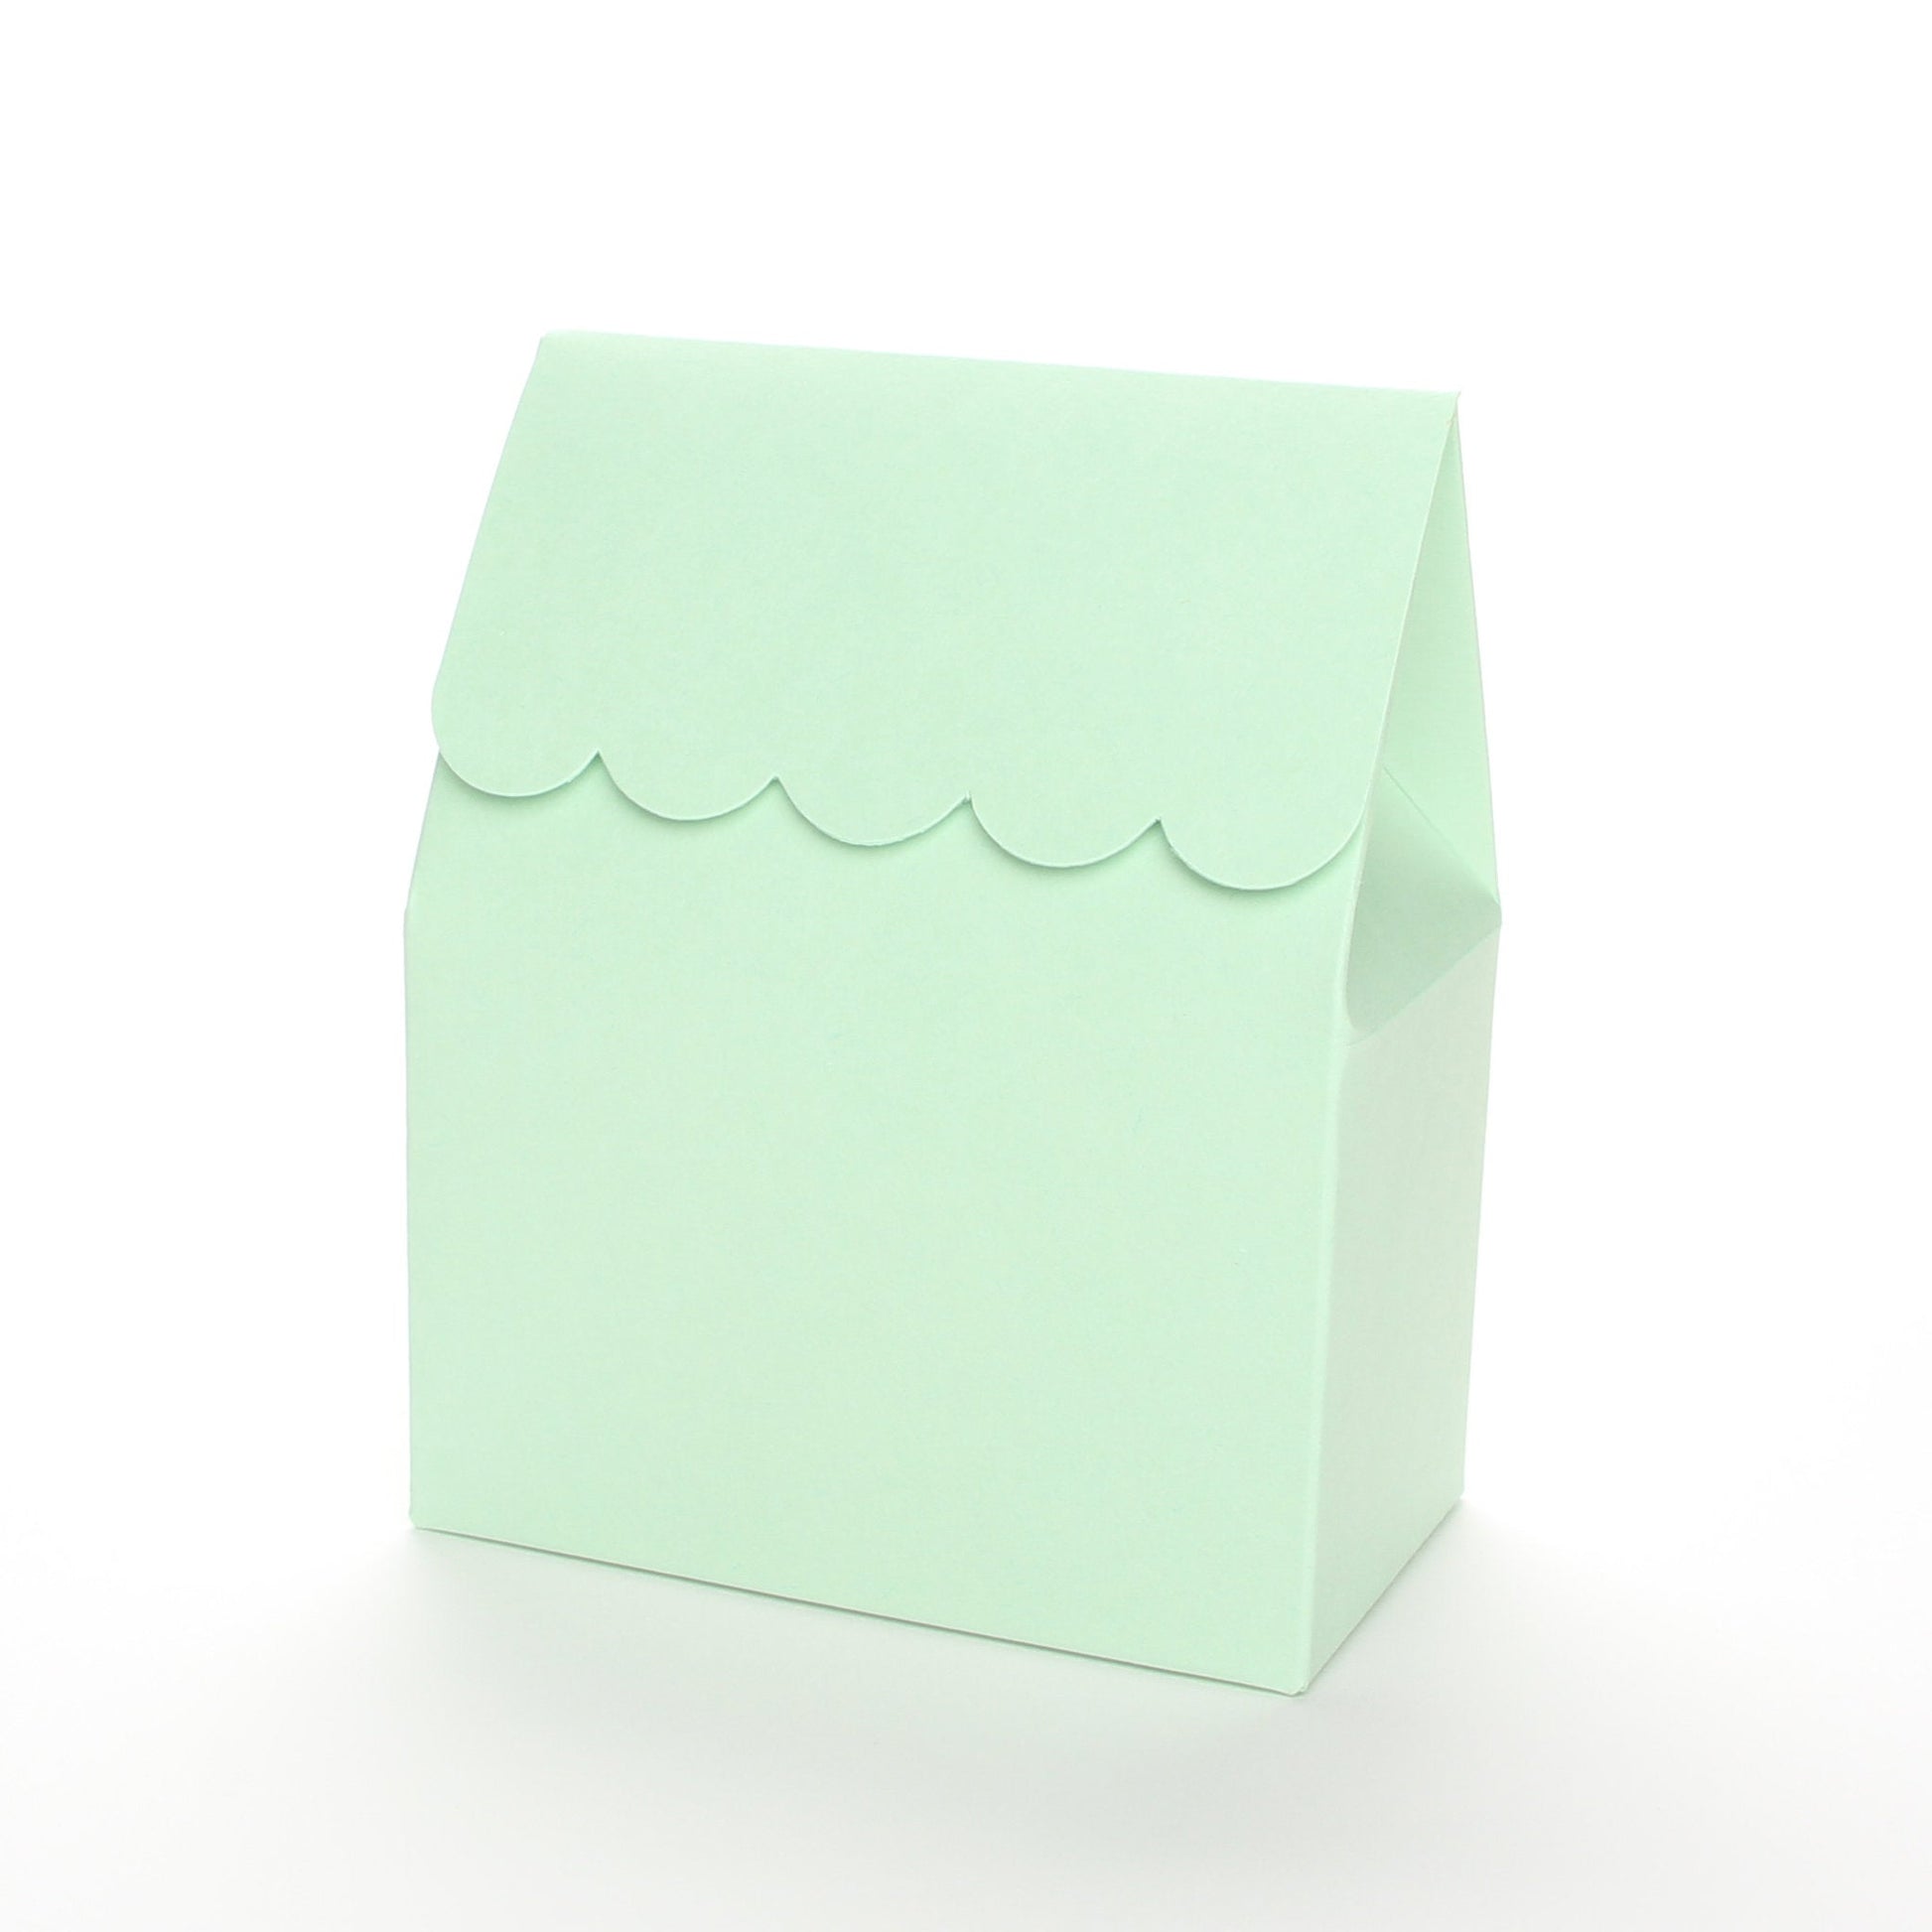 Mint green favor box by Lux Party with a scalloped edge on a white background.